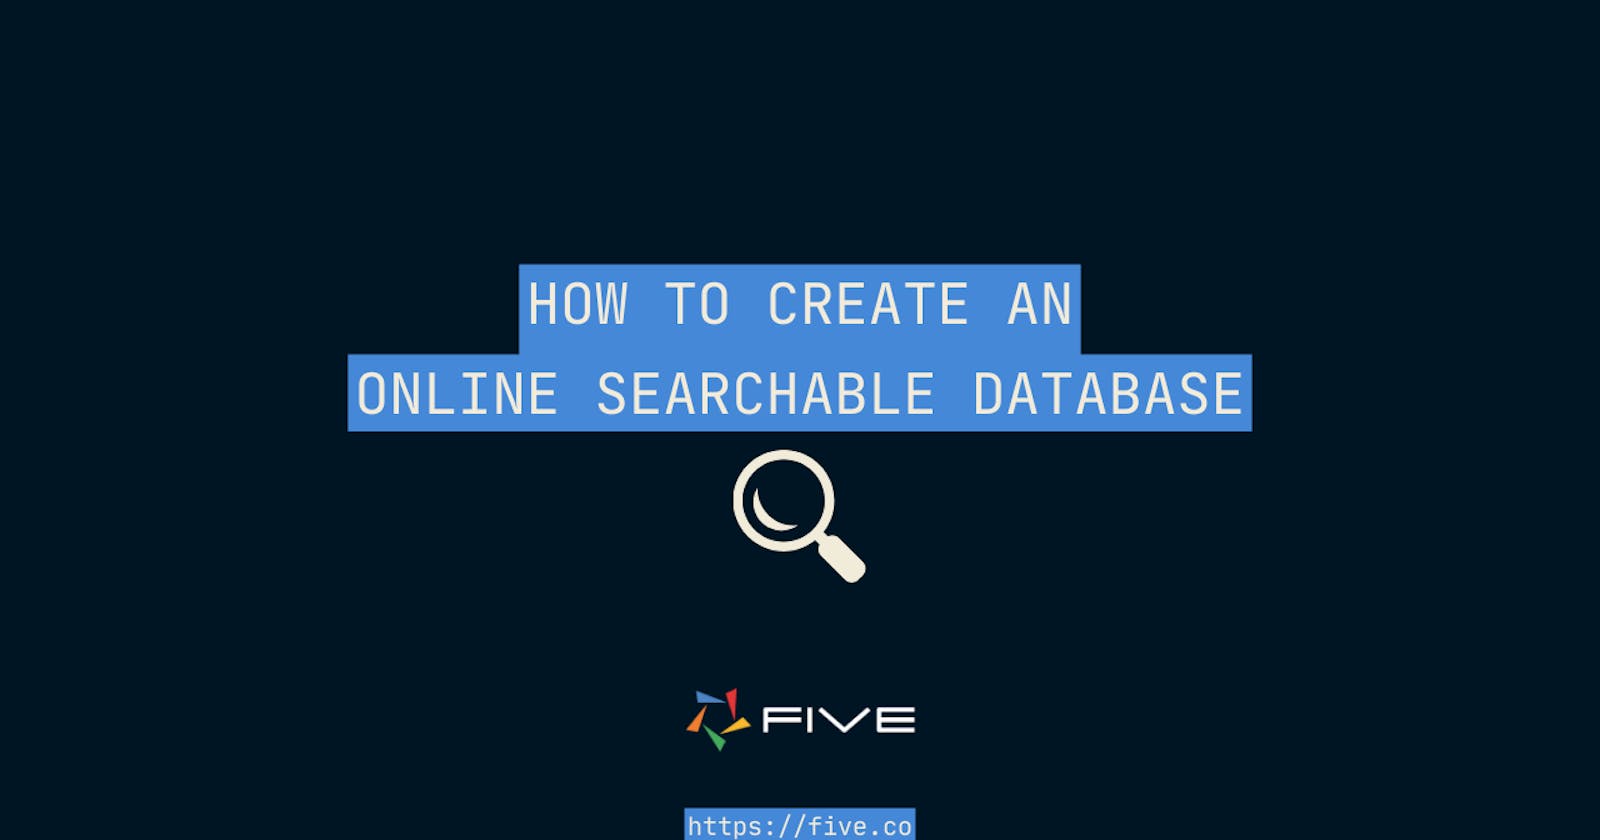 How To Create an Online Searchable Database Rapidly